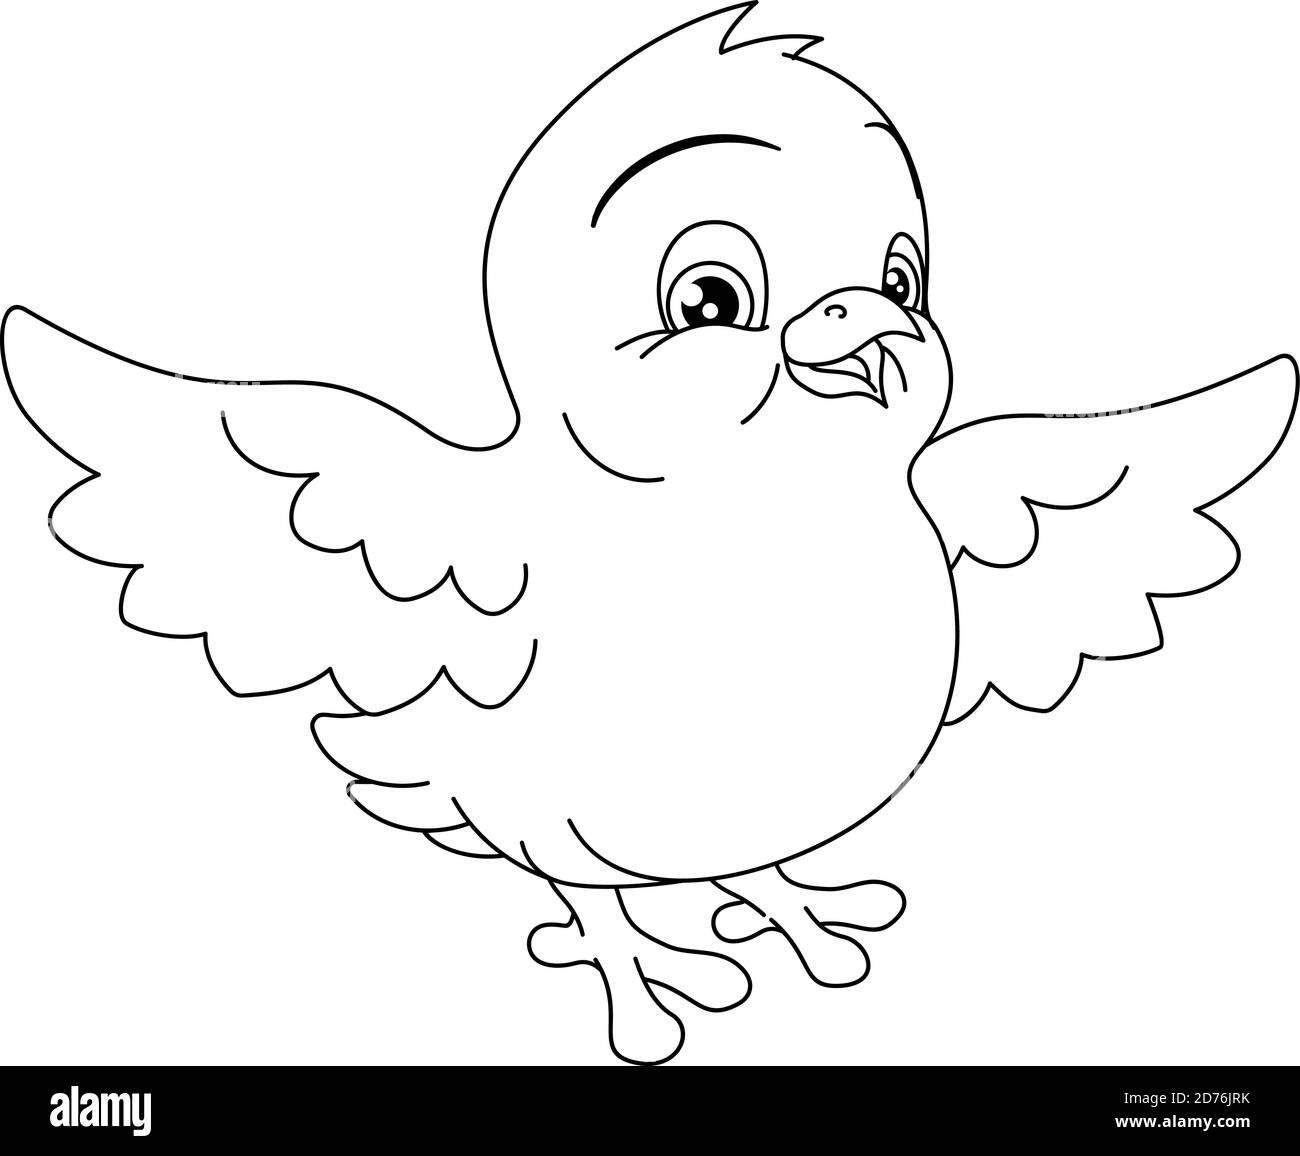 Easter Chick Coloring Book Black and White Cartoon Stock Vector